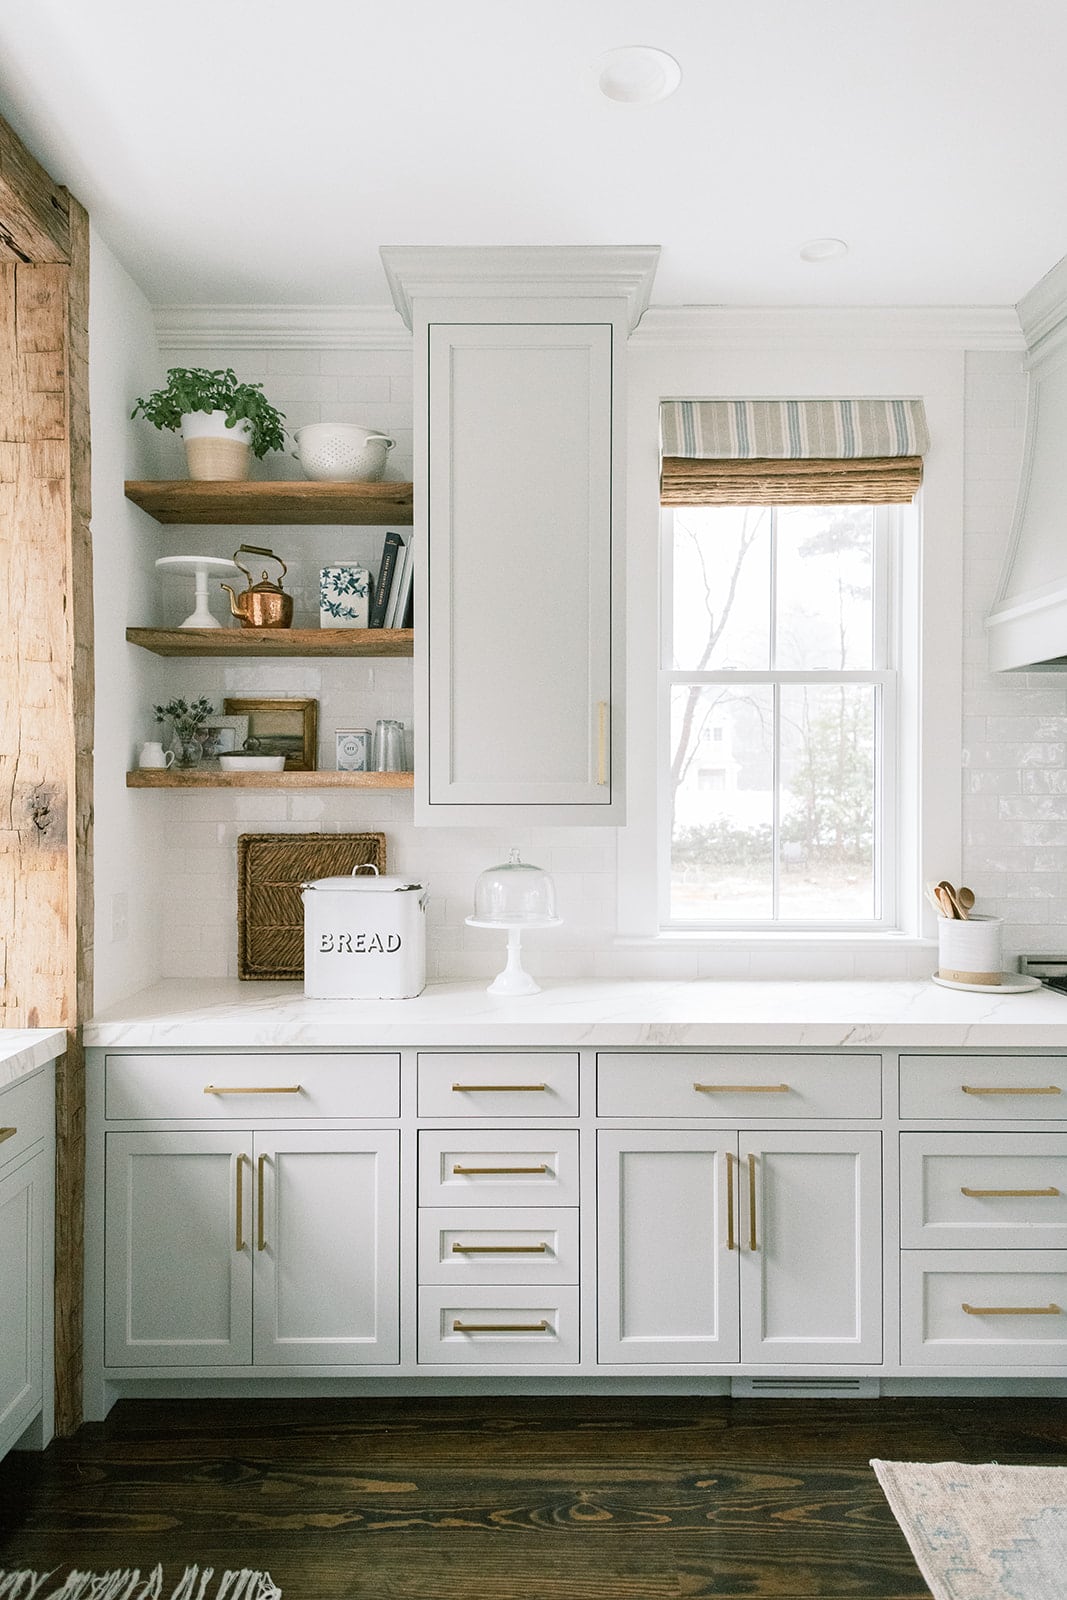 Light grey kitchen cabinets with gold pulls and wood floating shelves. White subway tile and quartz countertops.